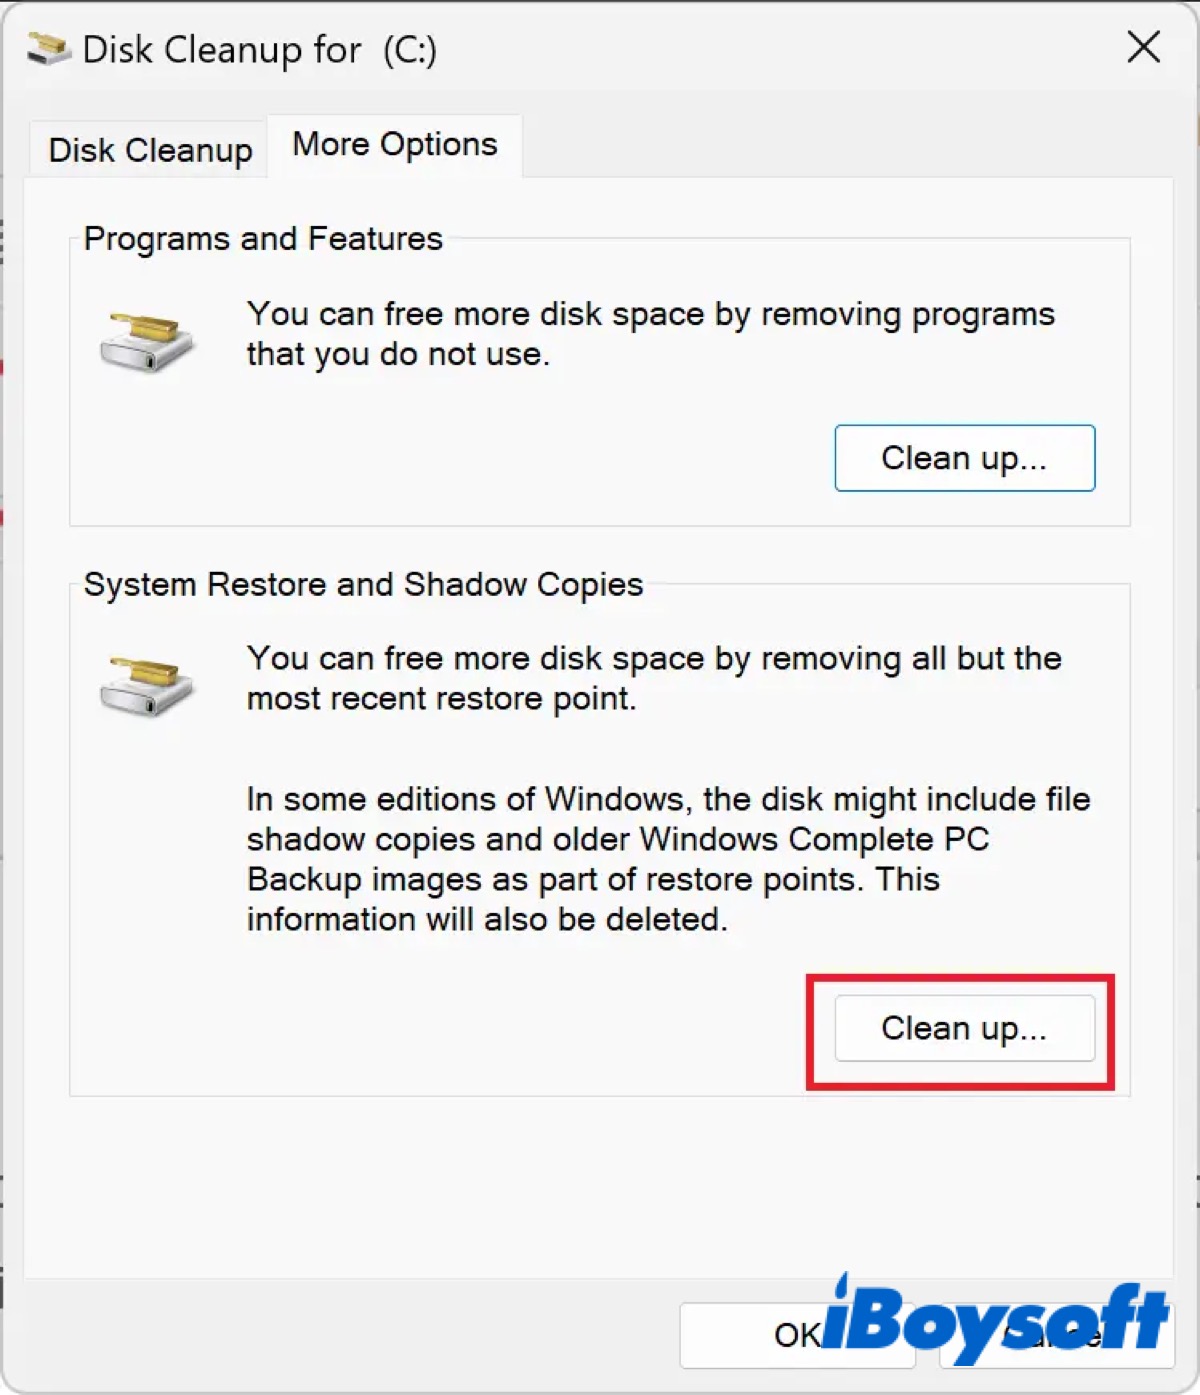 Use the Clean Up Option for System Restore and Shadow Copies